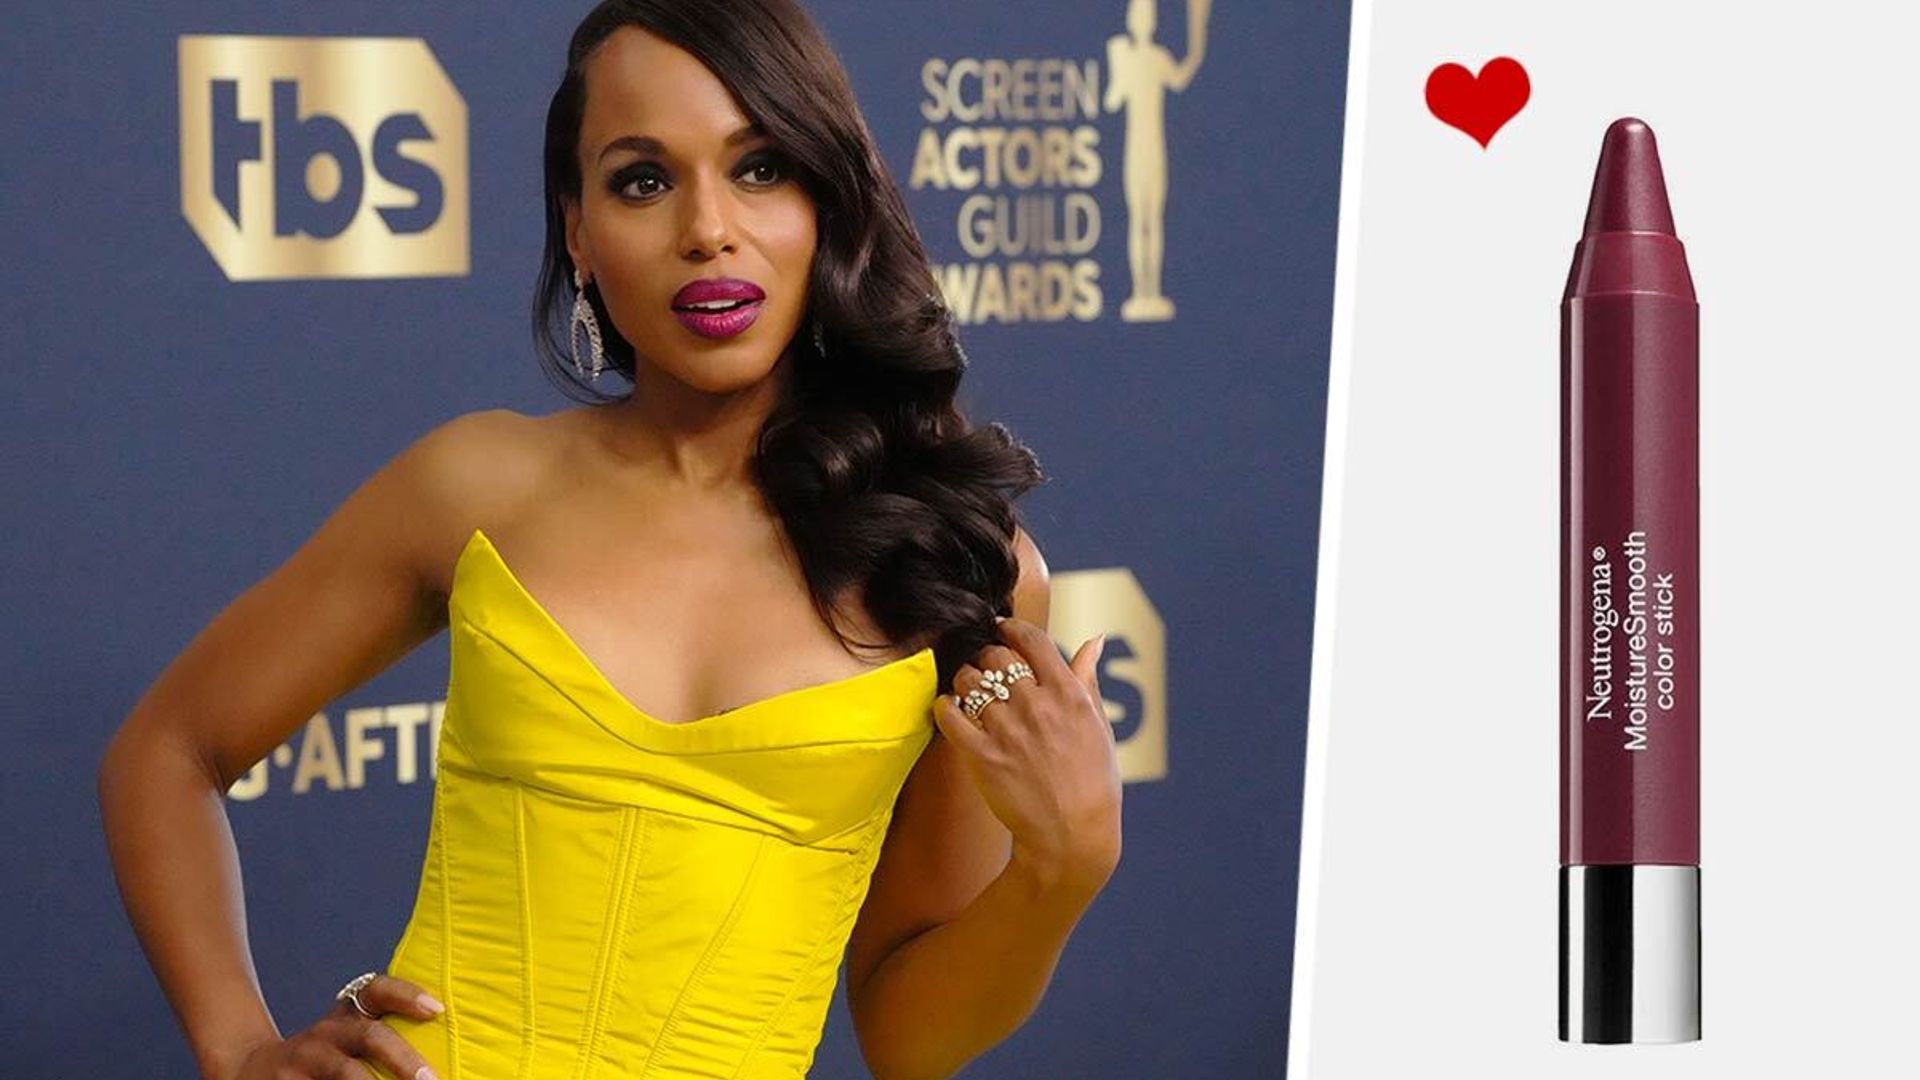 Kerry Washington's SAG Awards exact lipstick costs an affordable $12.50 - and it's selling out fast